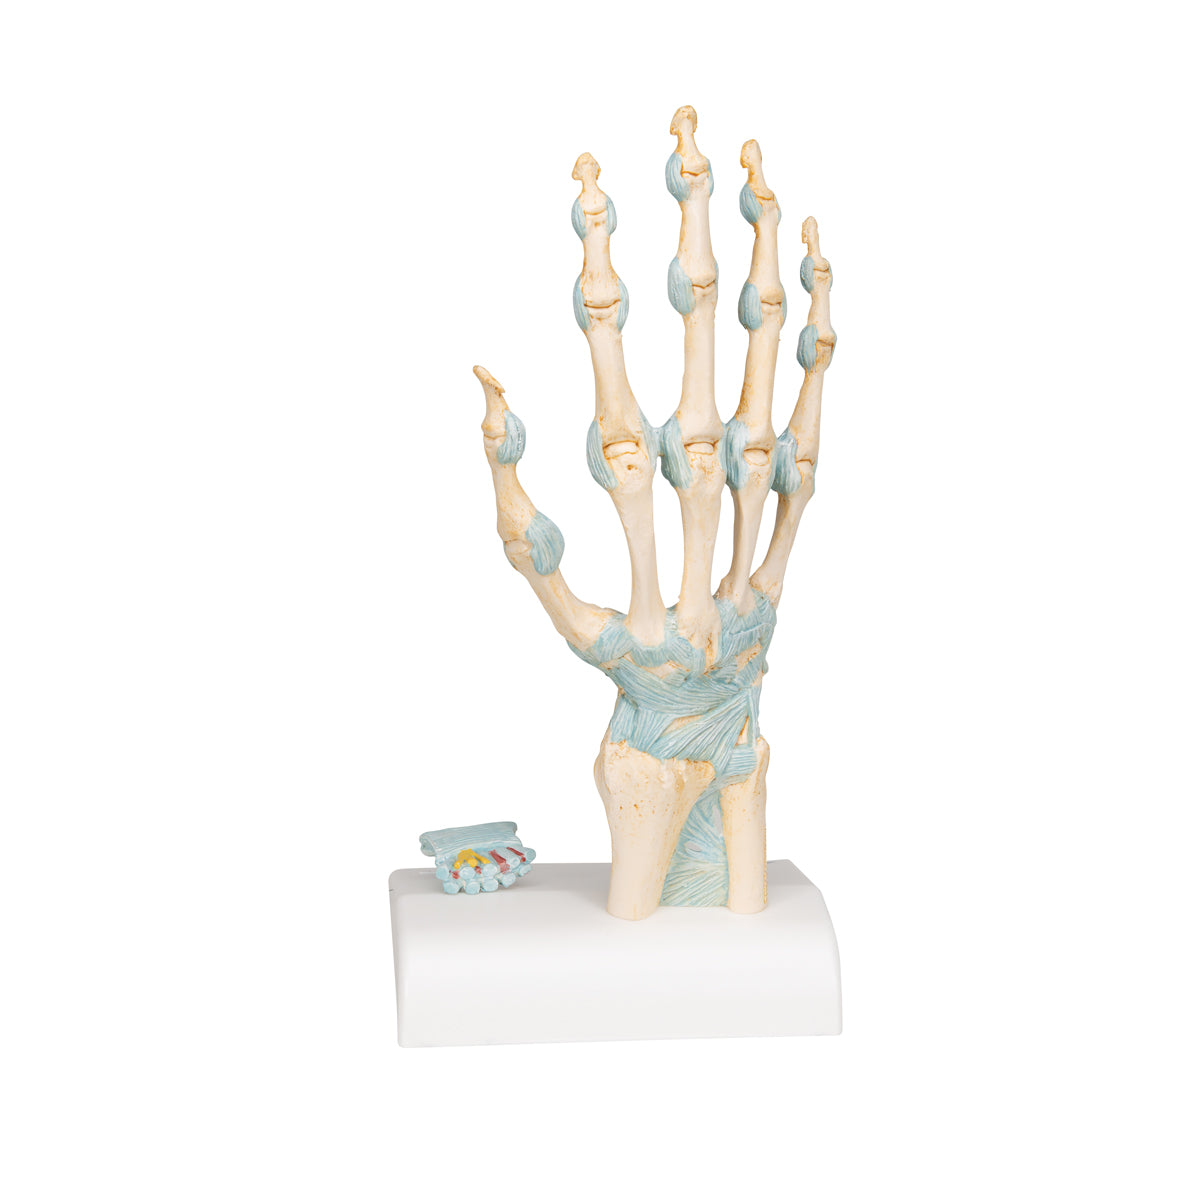 Hand model with ligaments and carpal tunnel contents